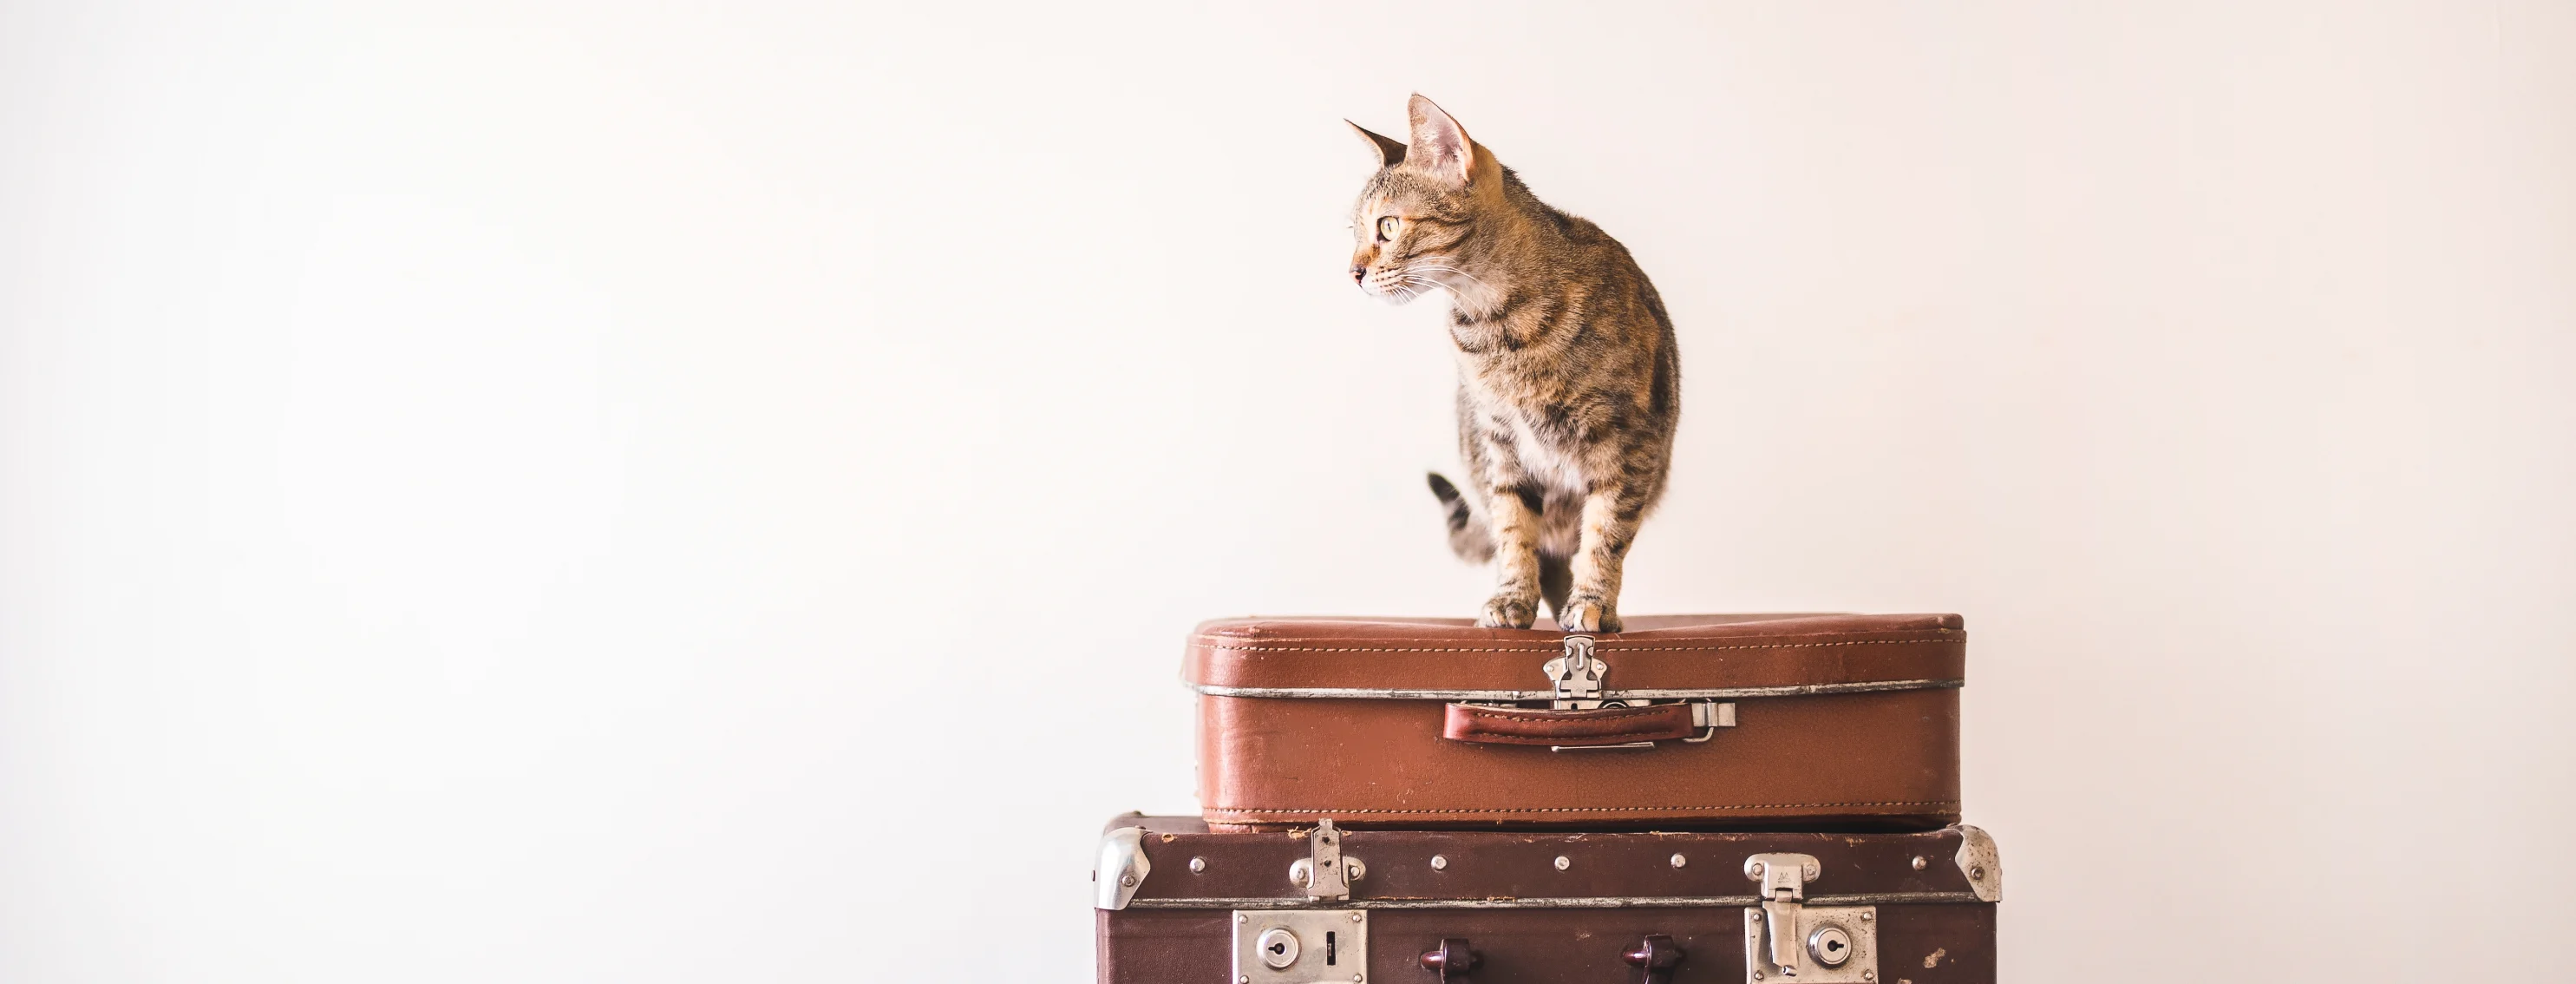 Cat standing on brown suitcases against a tan background